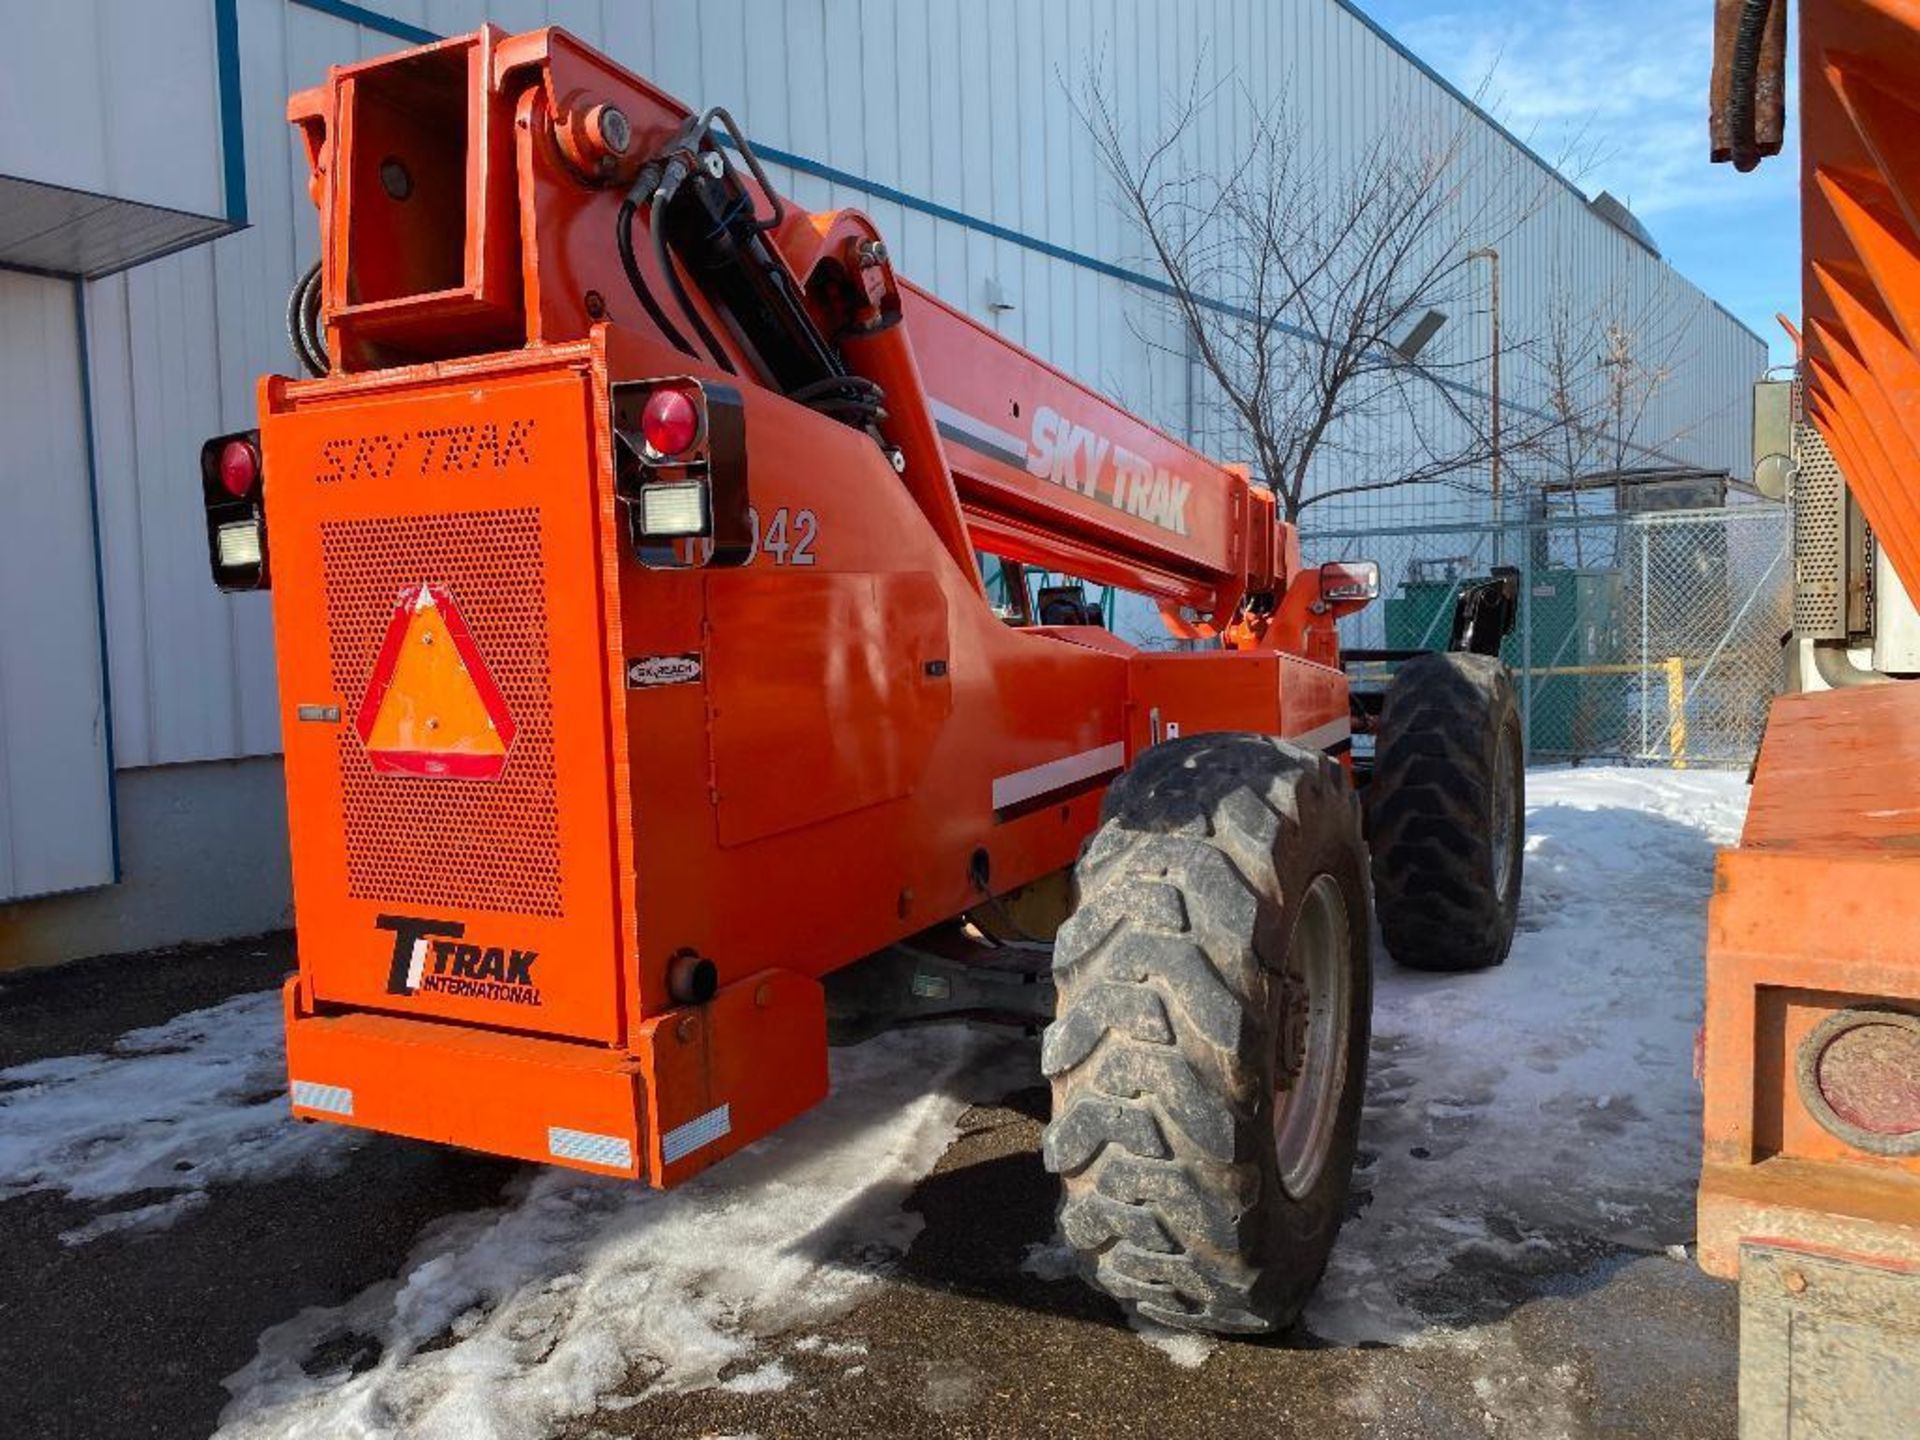 Skytrack 10042 Telehandler, 113hrs Showing, Weight: 27,000, Serial: 2234 - Image 3 of 15